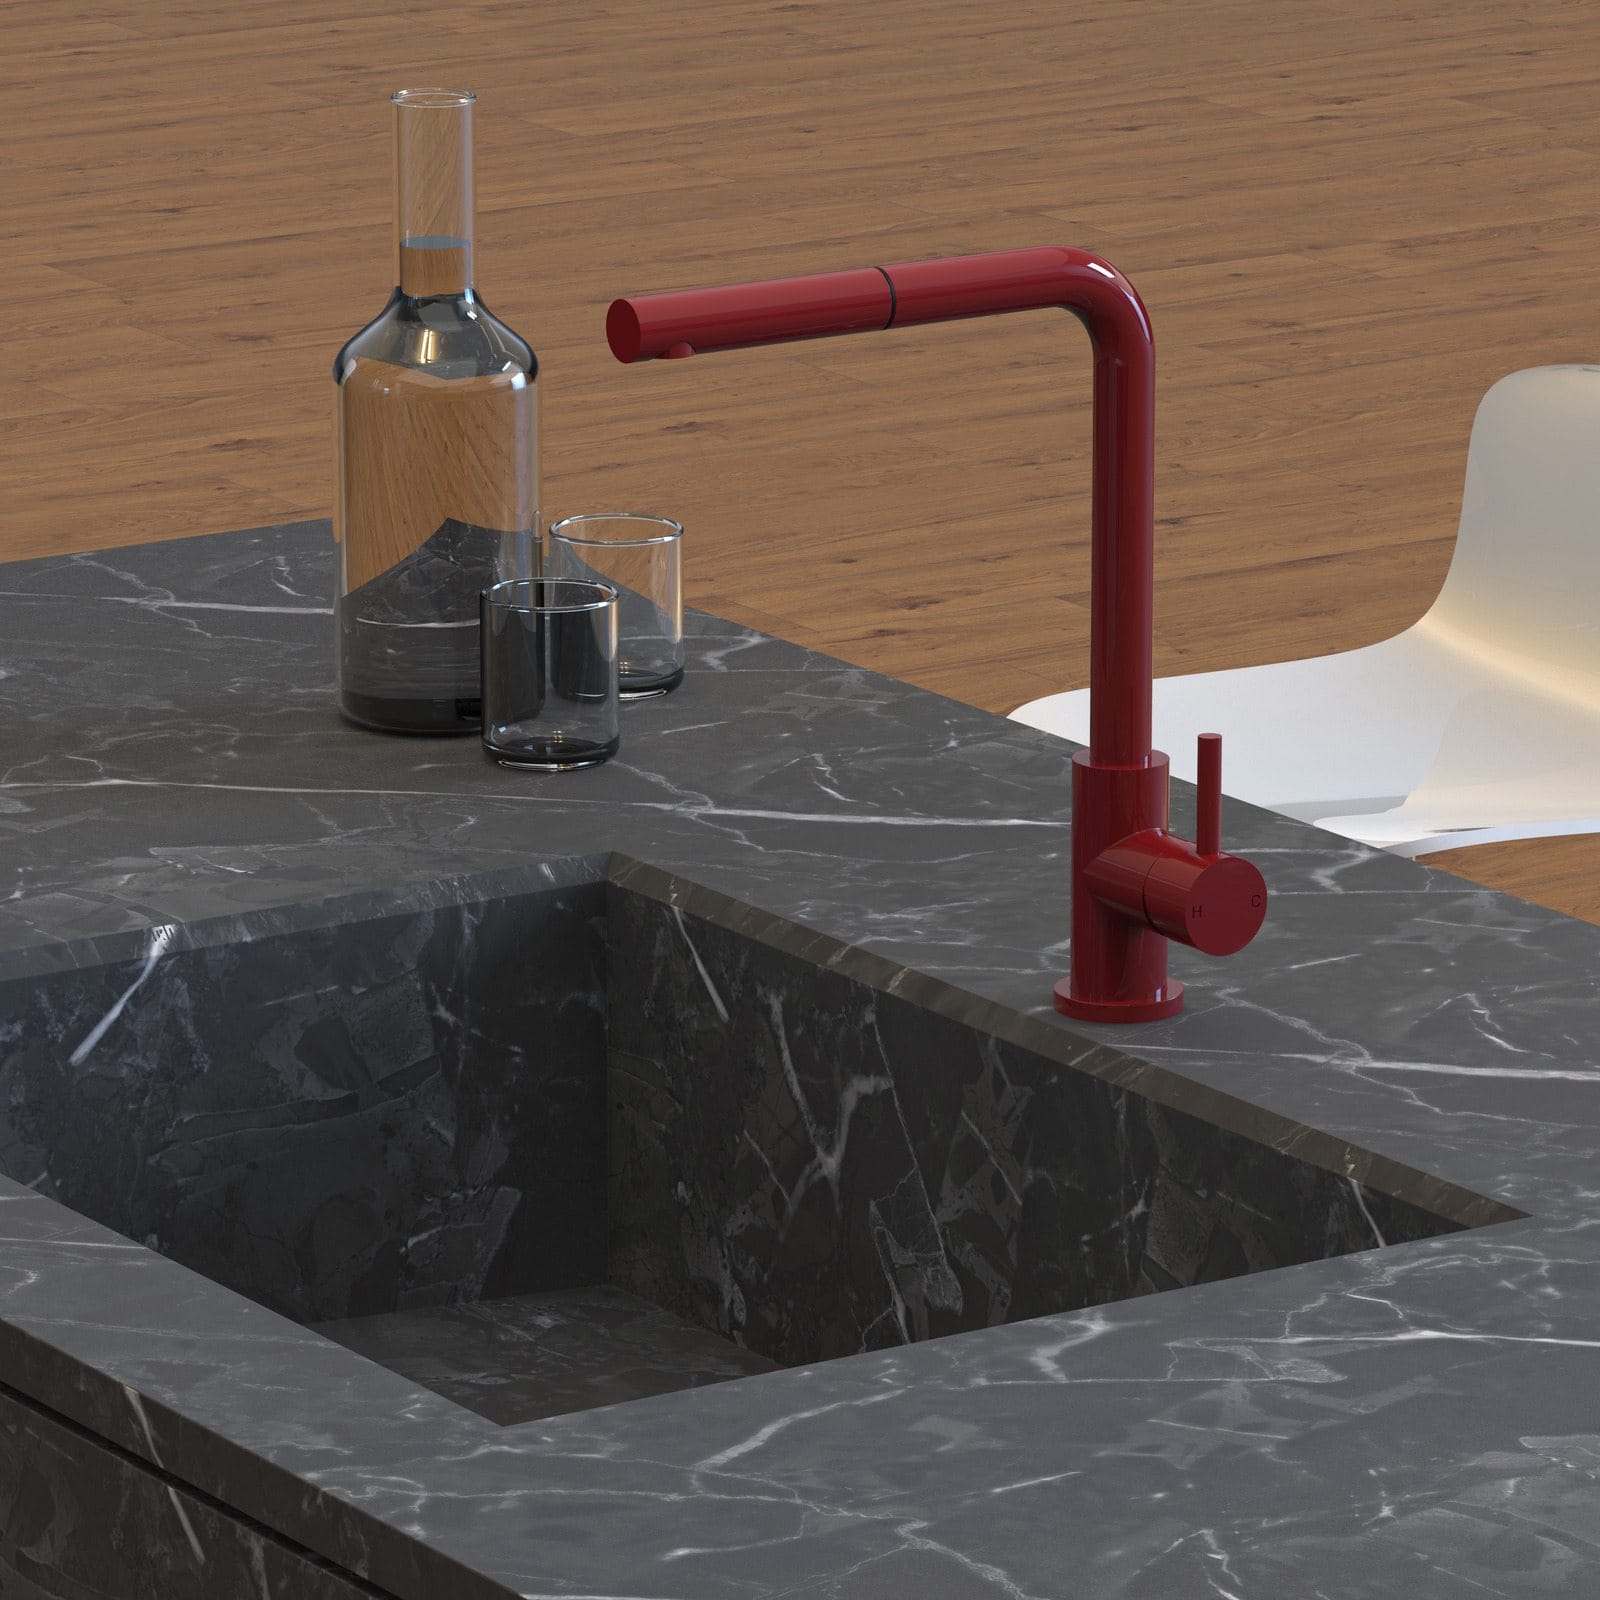 PAR TAPS. Copyright of PAR TAPS. Close up render of kitchen benchtop featuring integrated stone sink and red mixer. 